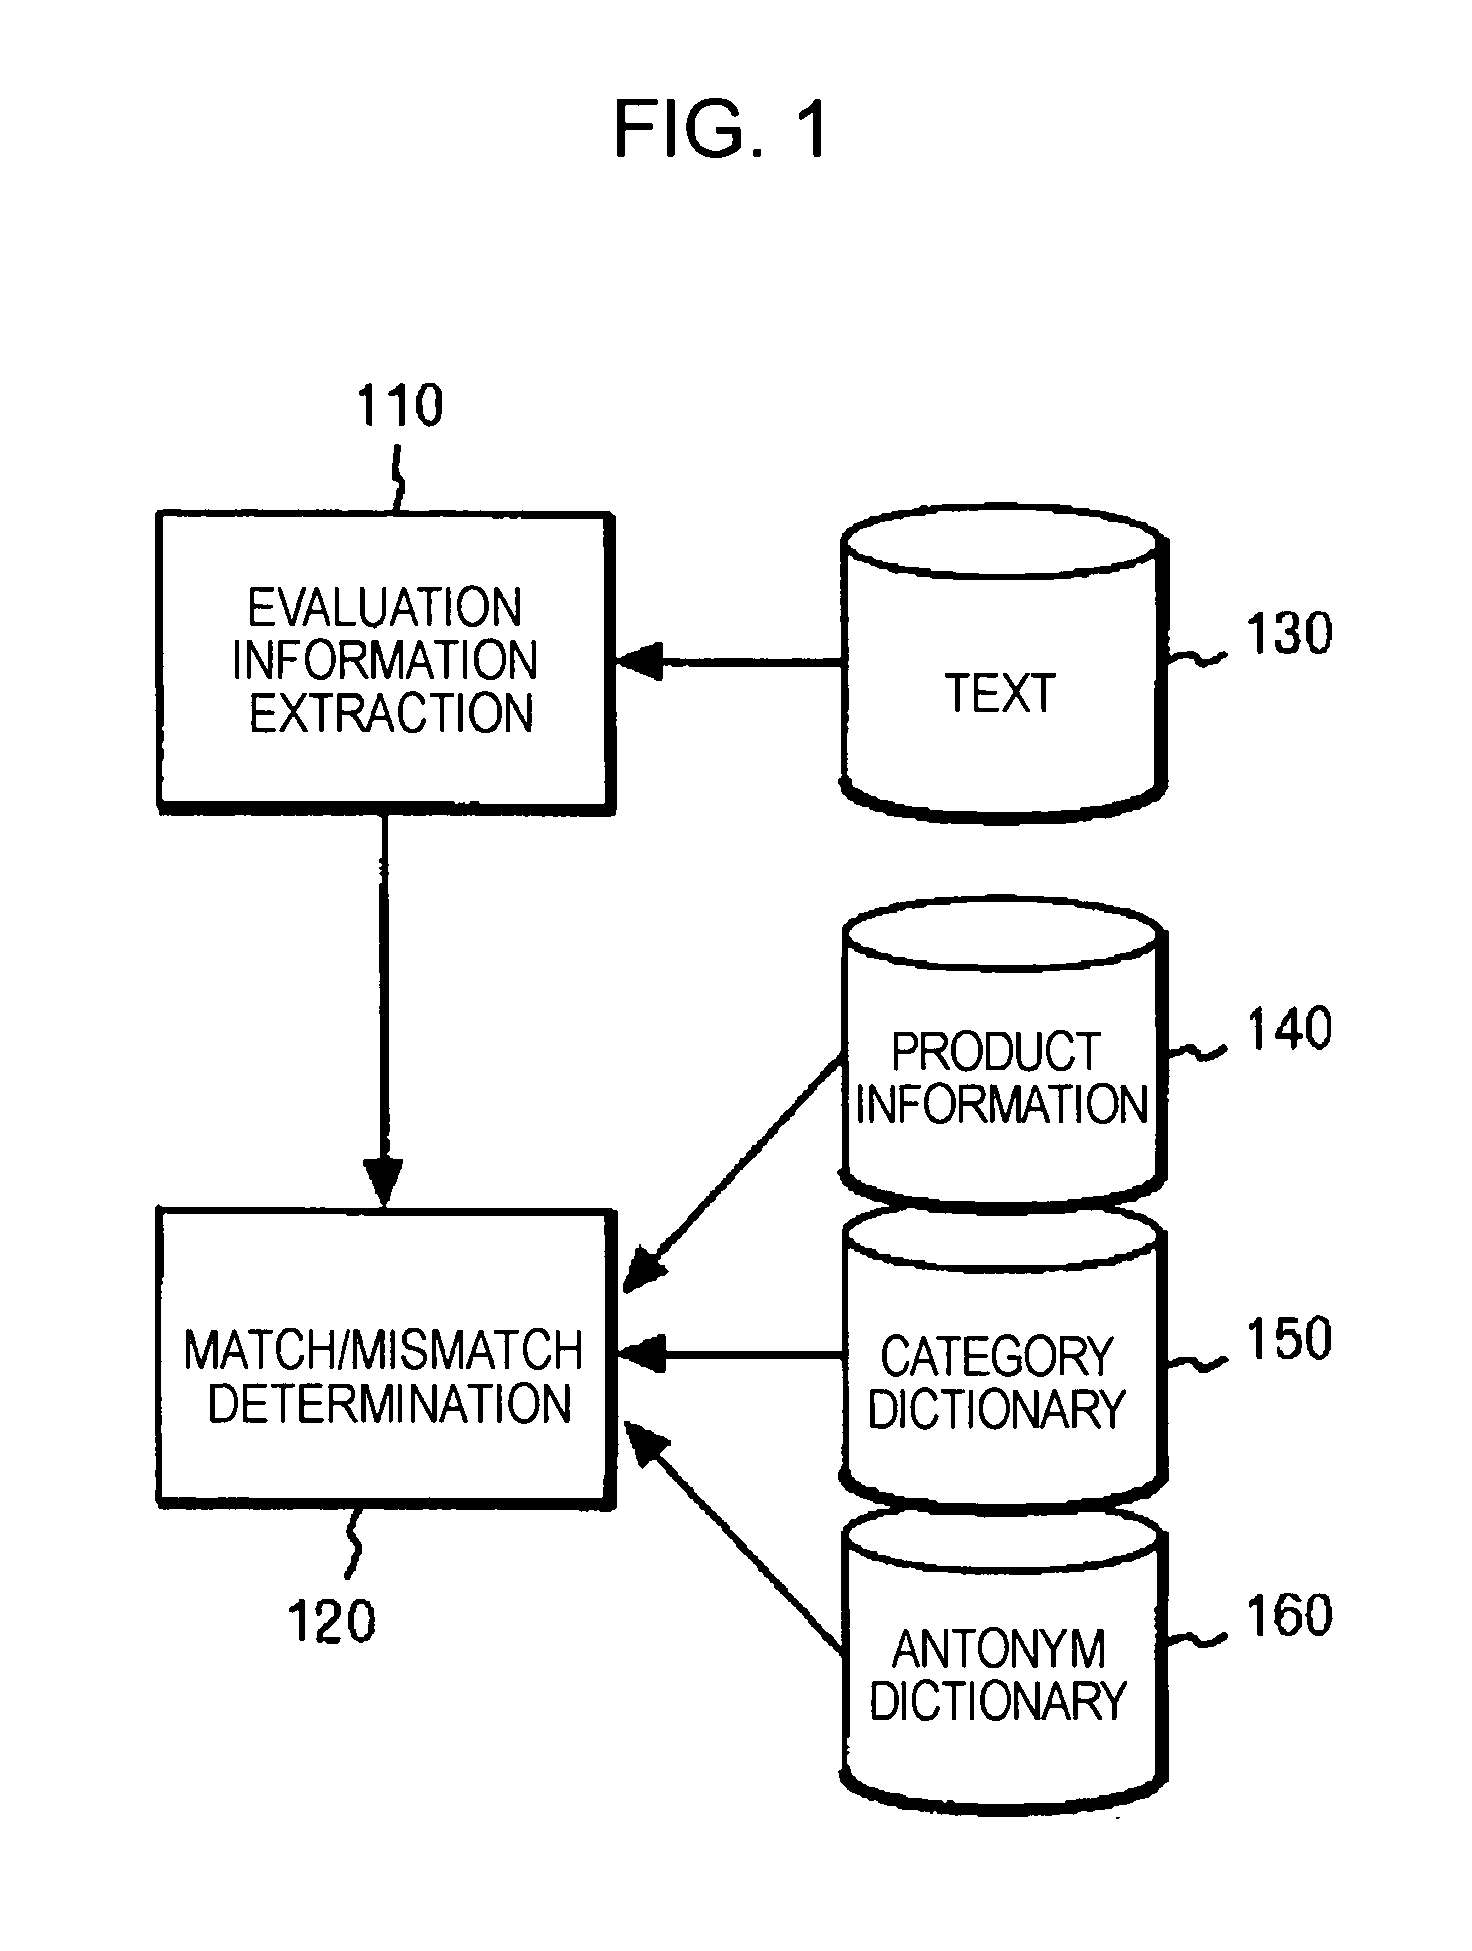 Method, apparatus, and program product for processing product evaluations